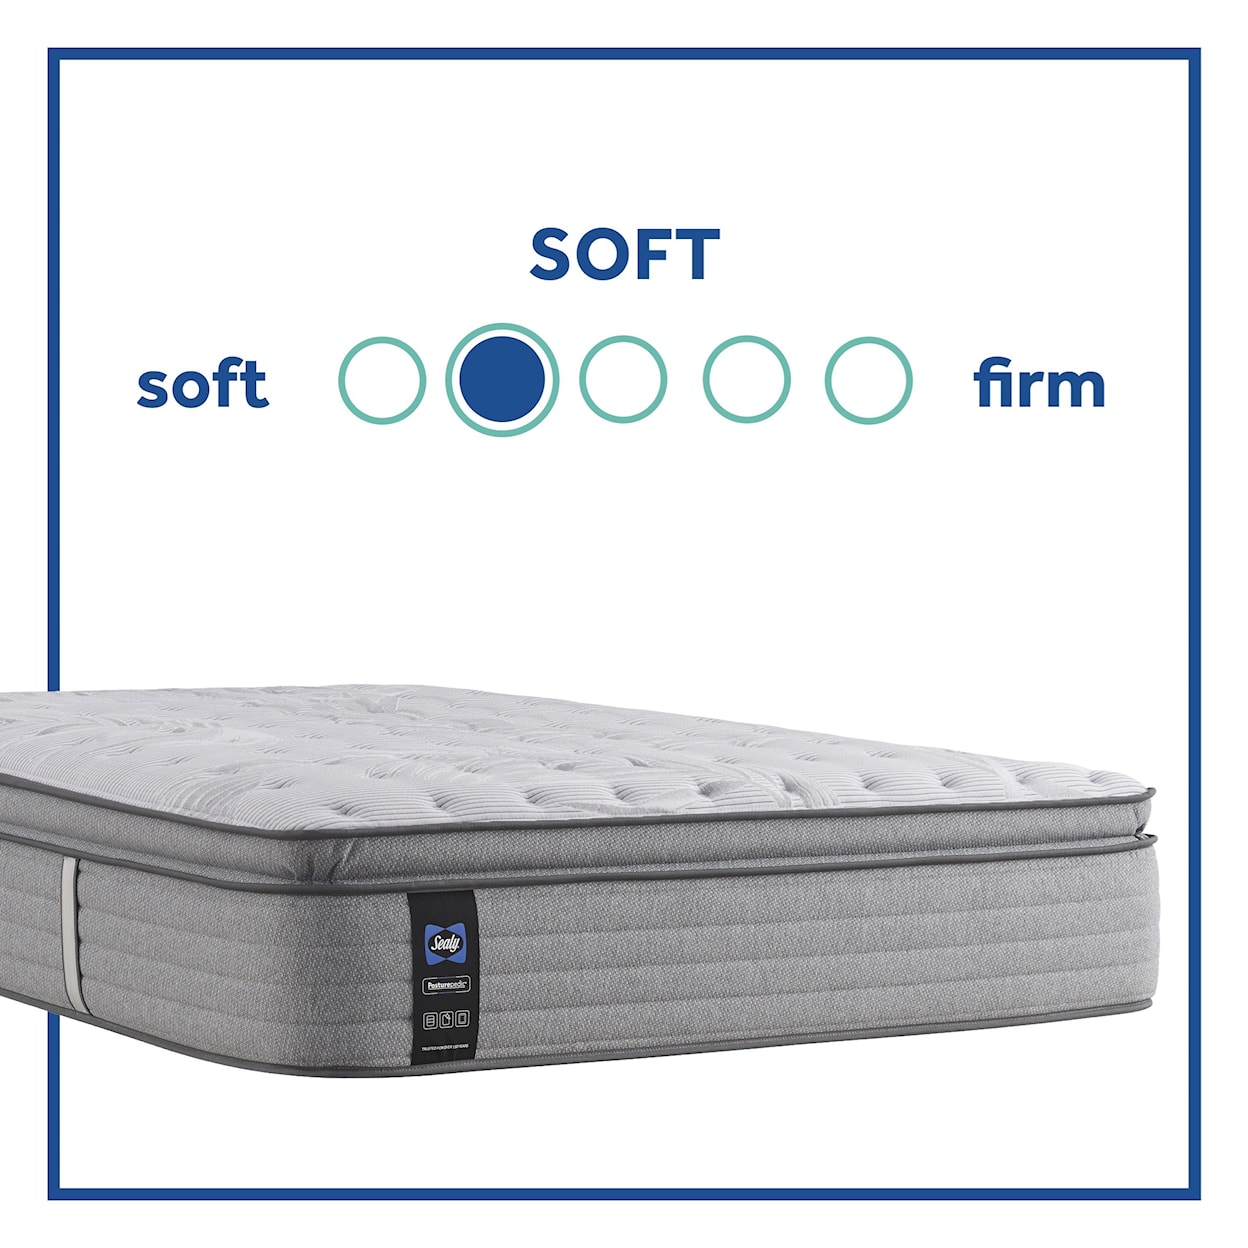 Sealy PPS5 Posturpedic Innerspring Soft EPT Full 15" Soft Euro Pillow Top Mattress